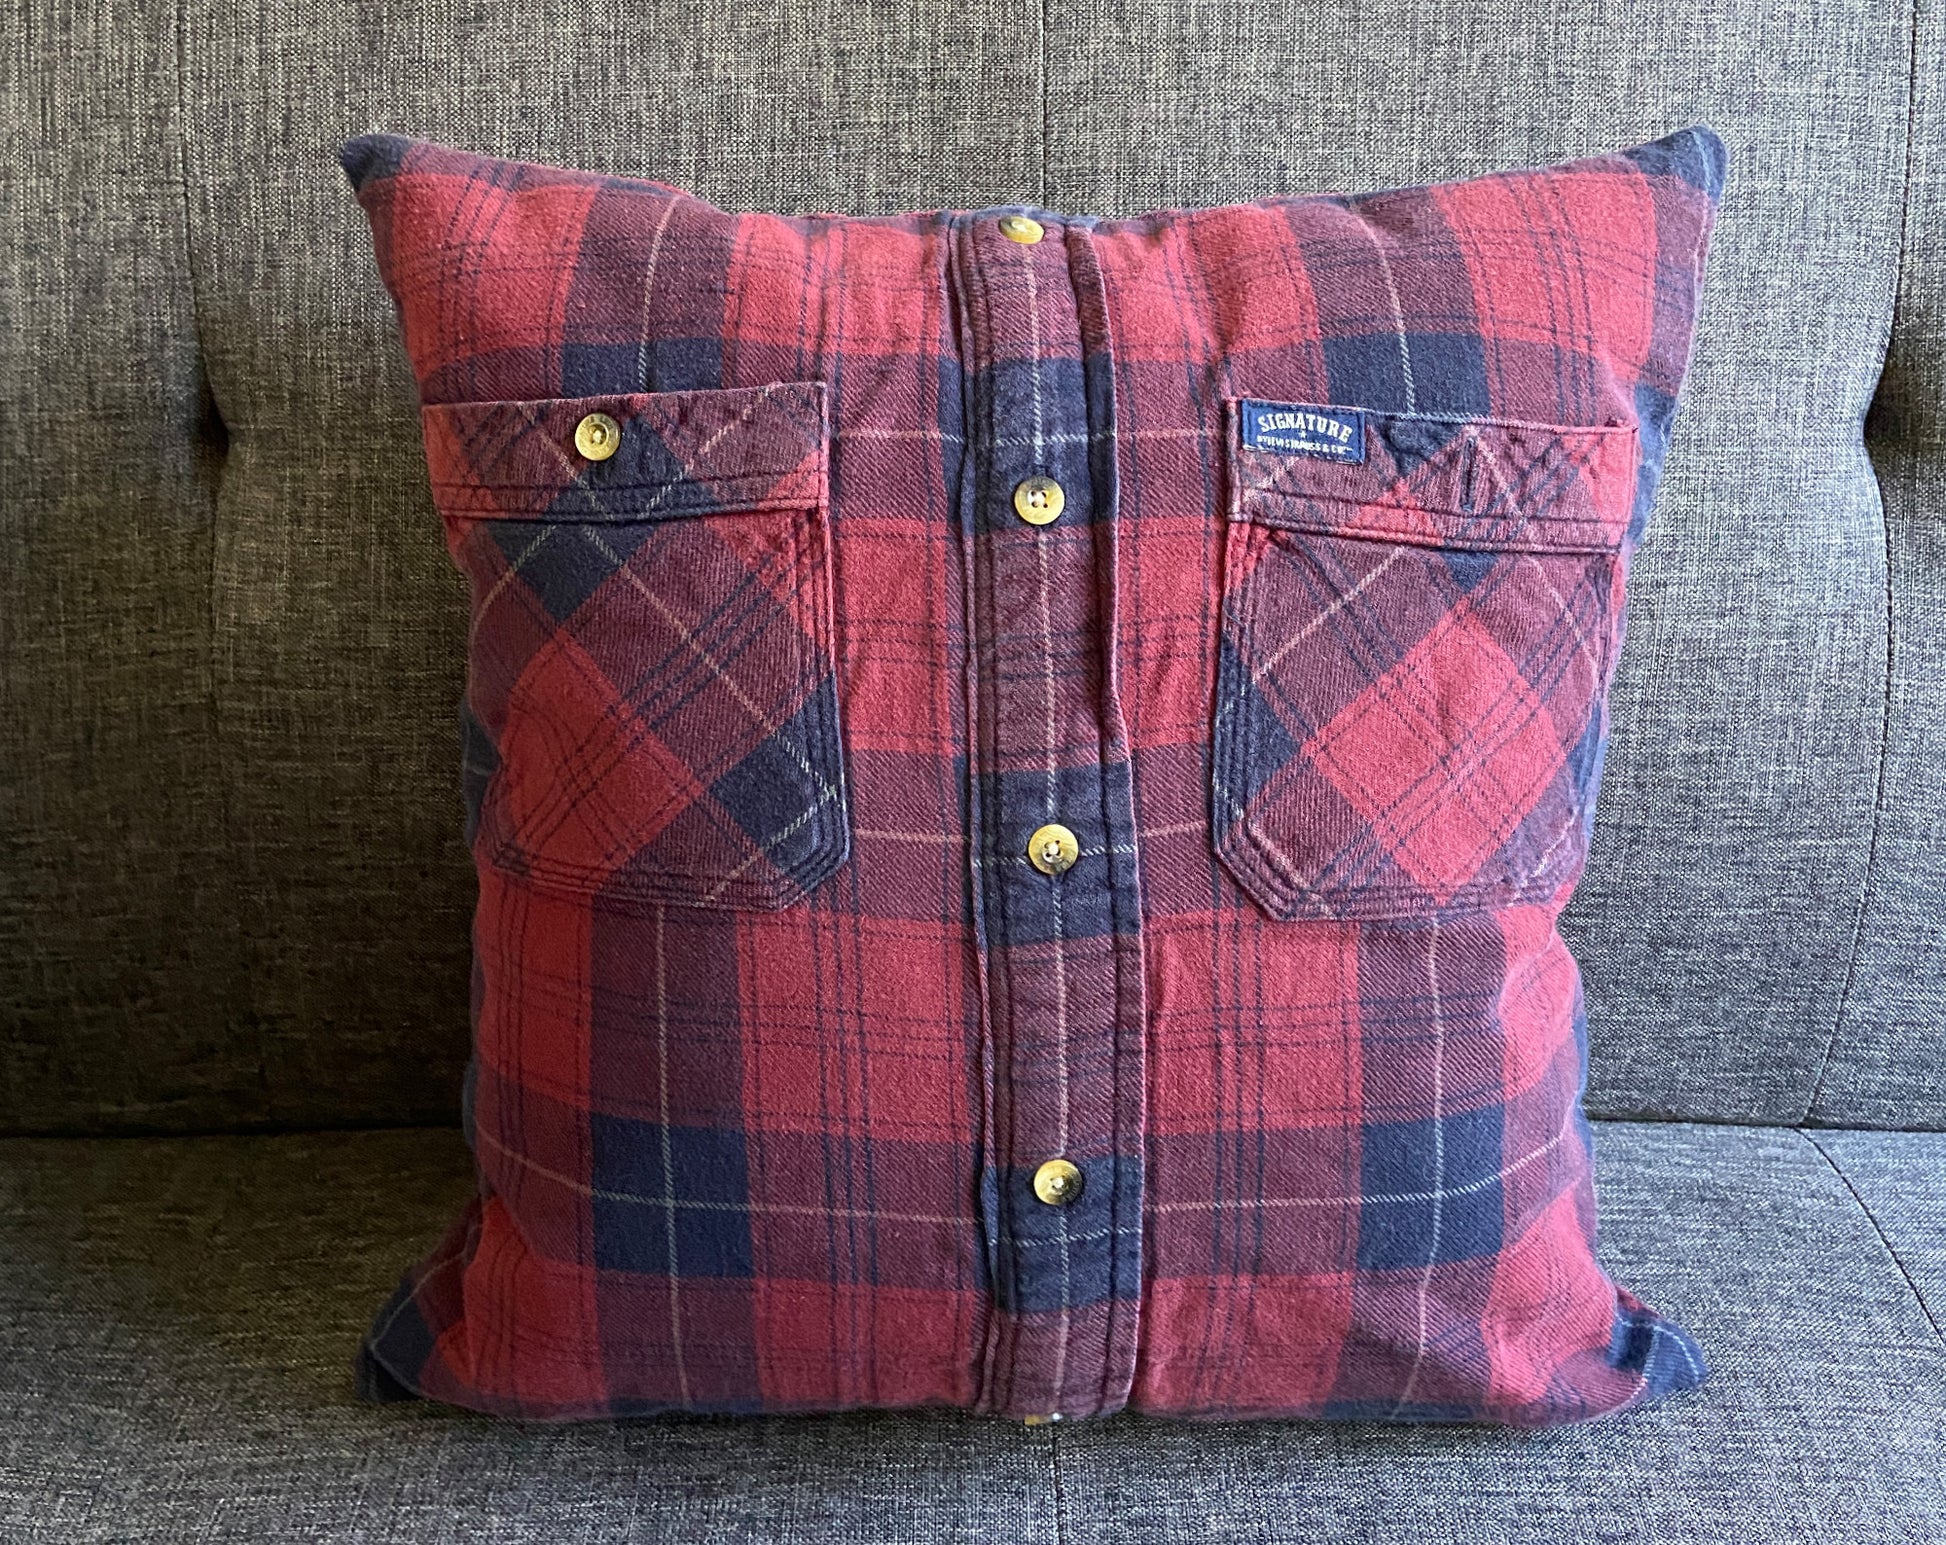 memory pillow made from a shirt